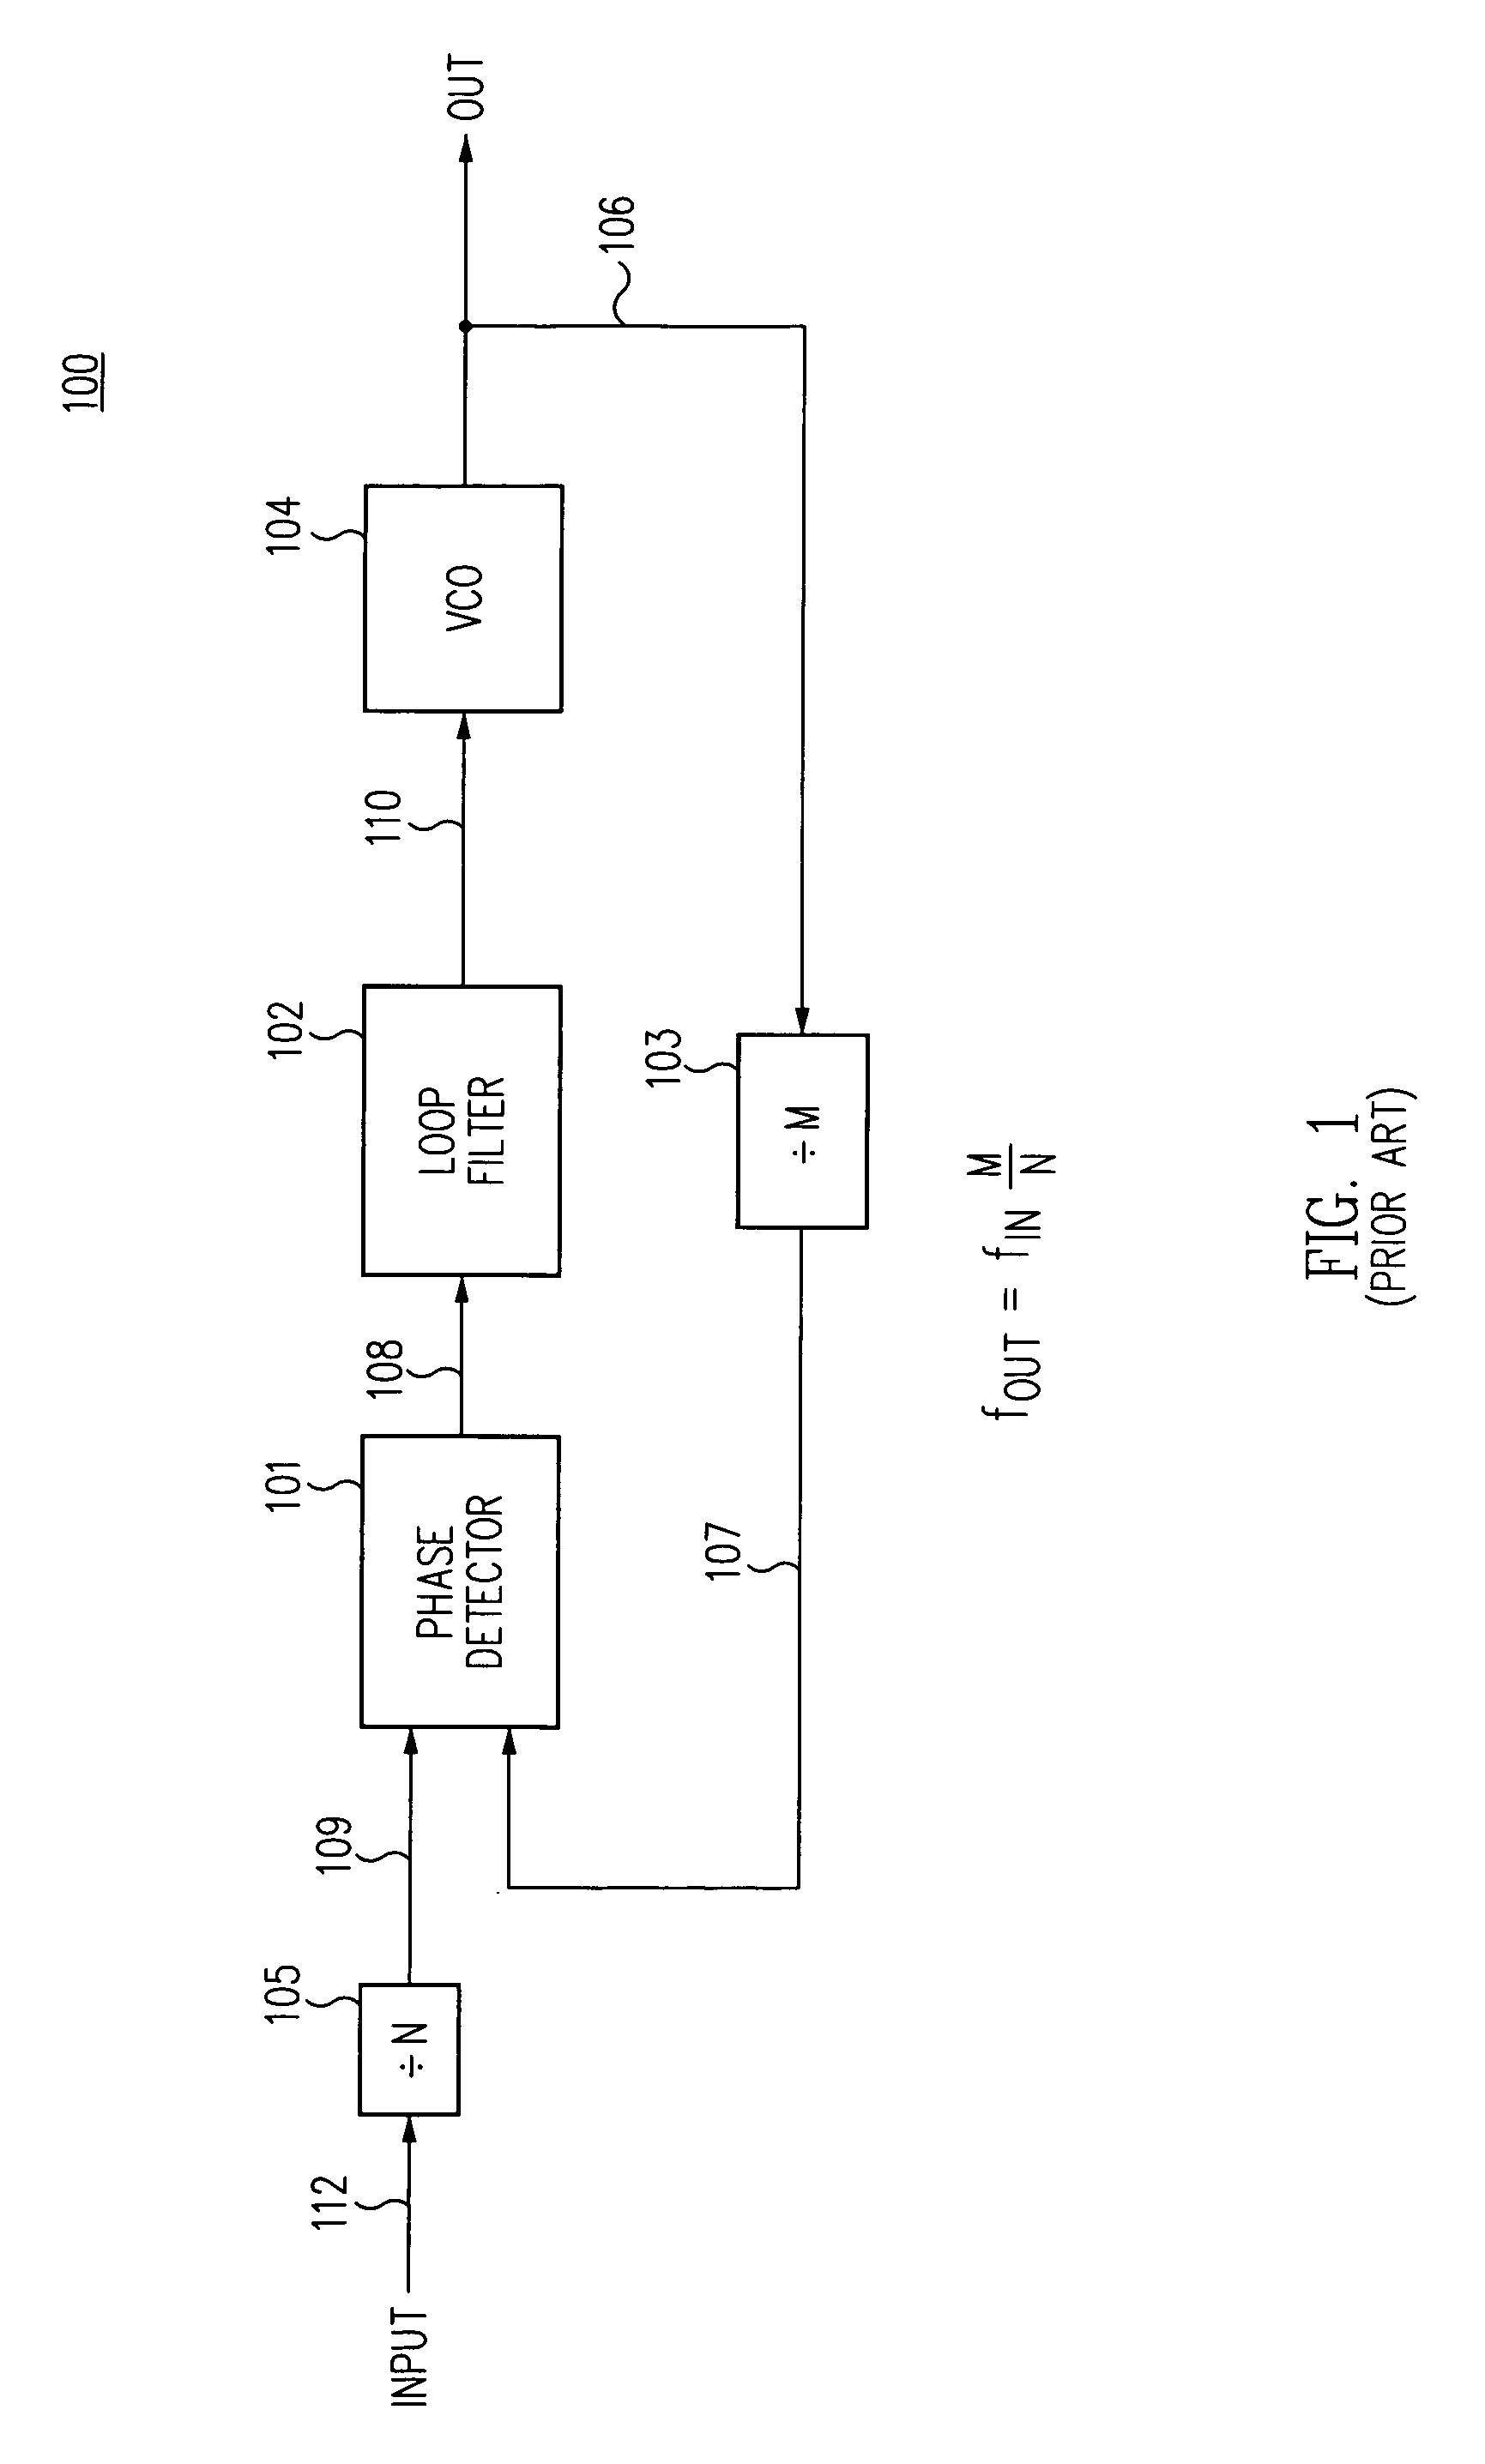 Dual phased-locked loop structure having configurable intermediate frequency and reduced susceptibility to interference